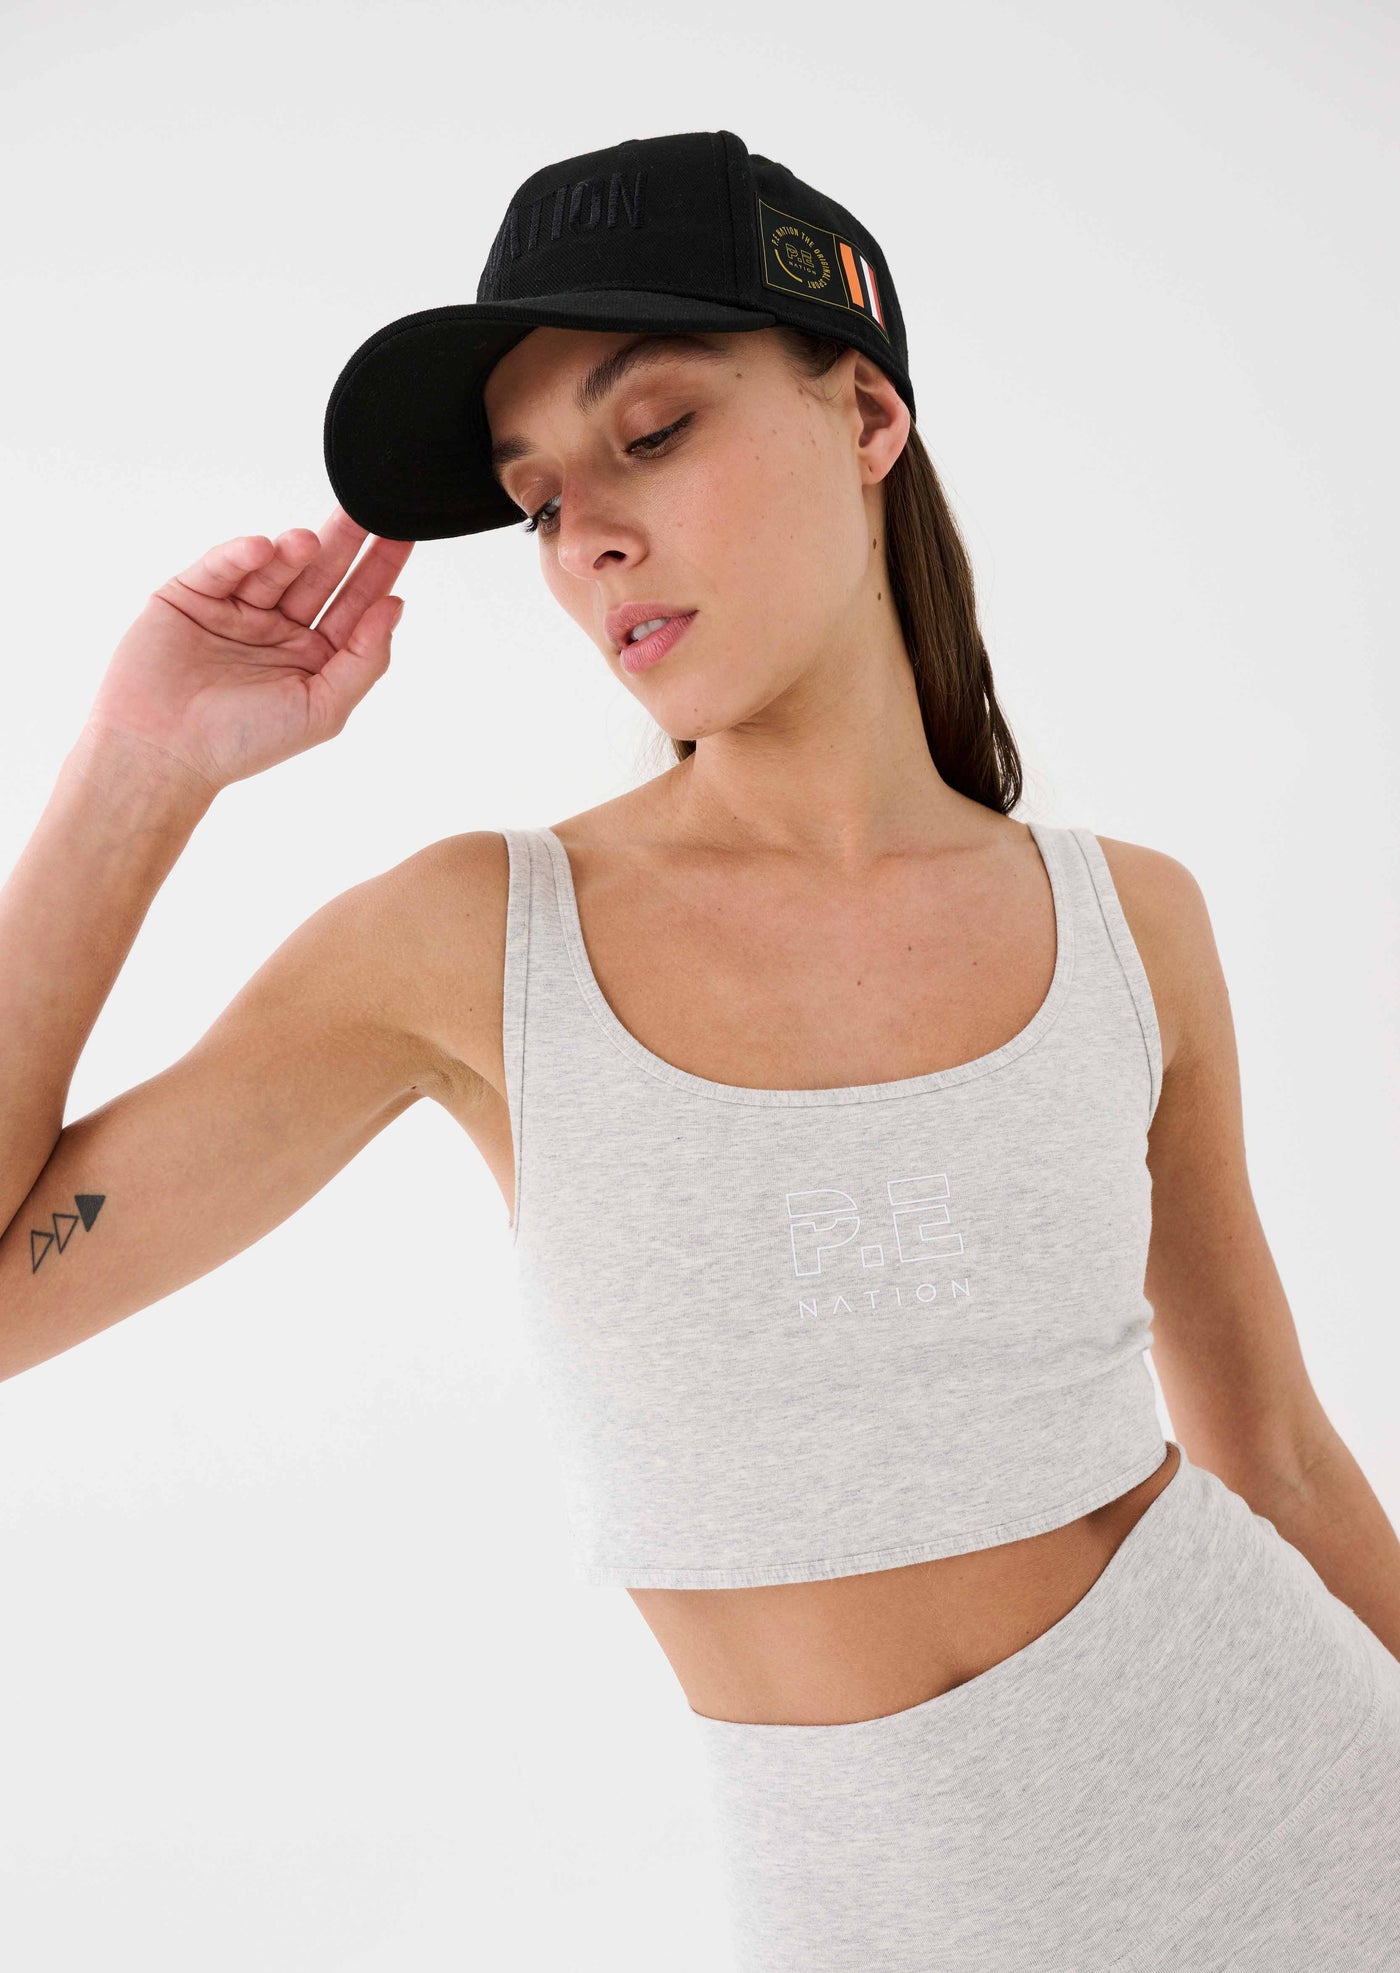 THE LEADOFF RECYCLED SPORTS BRA IN GREY MARL